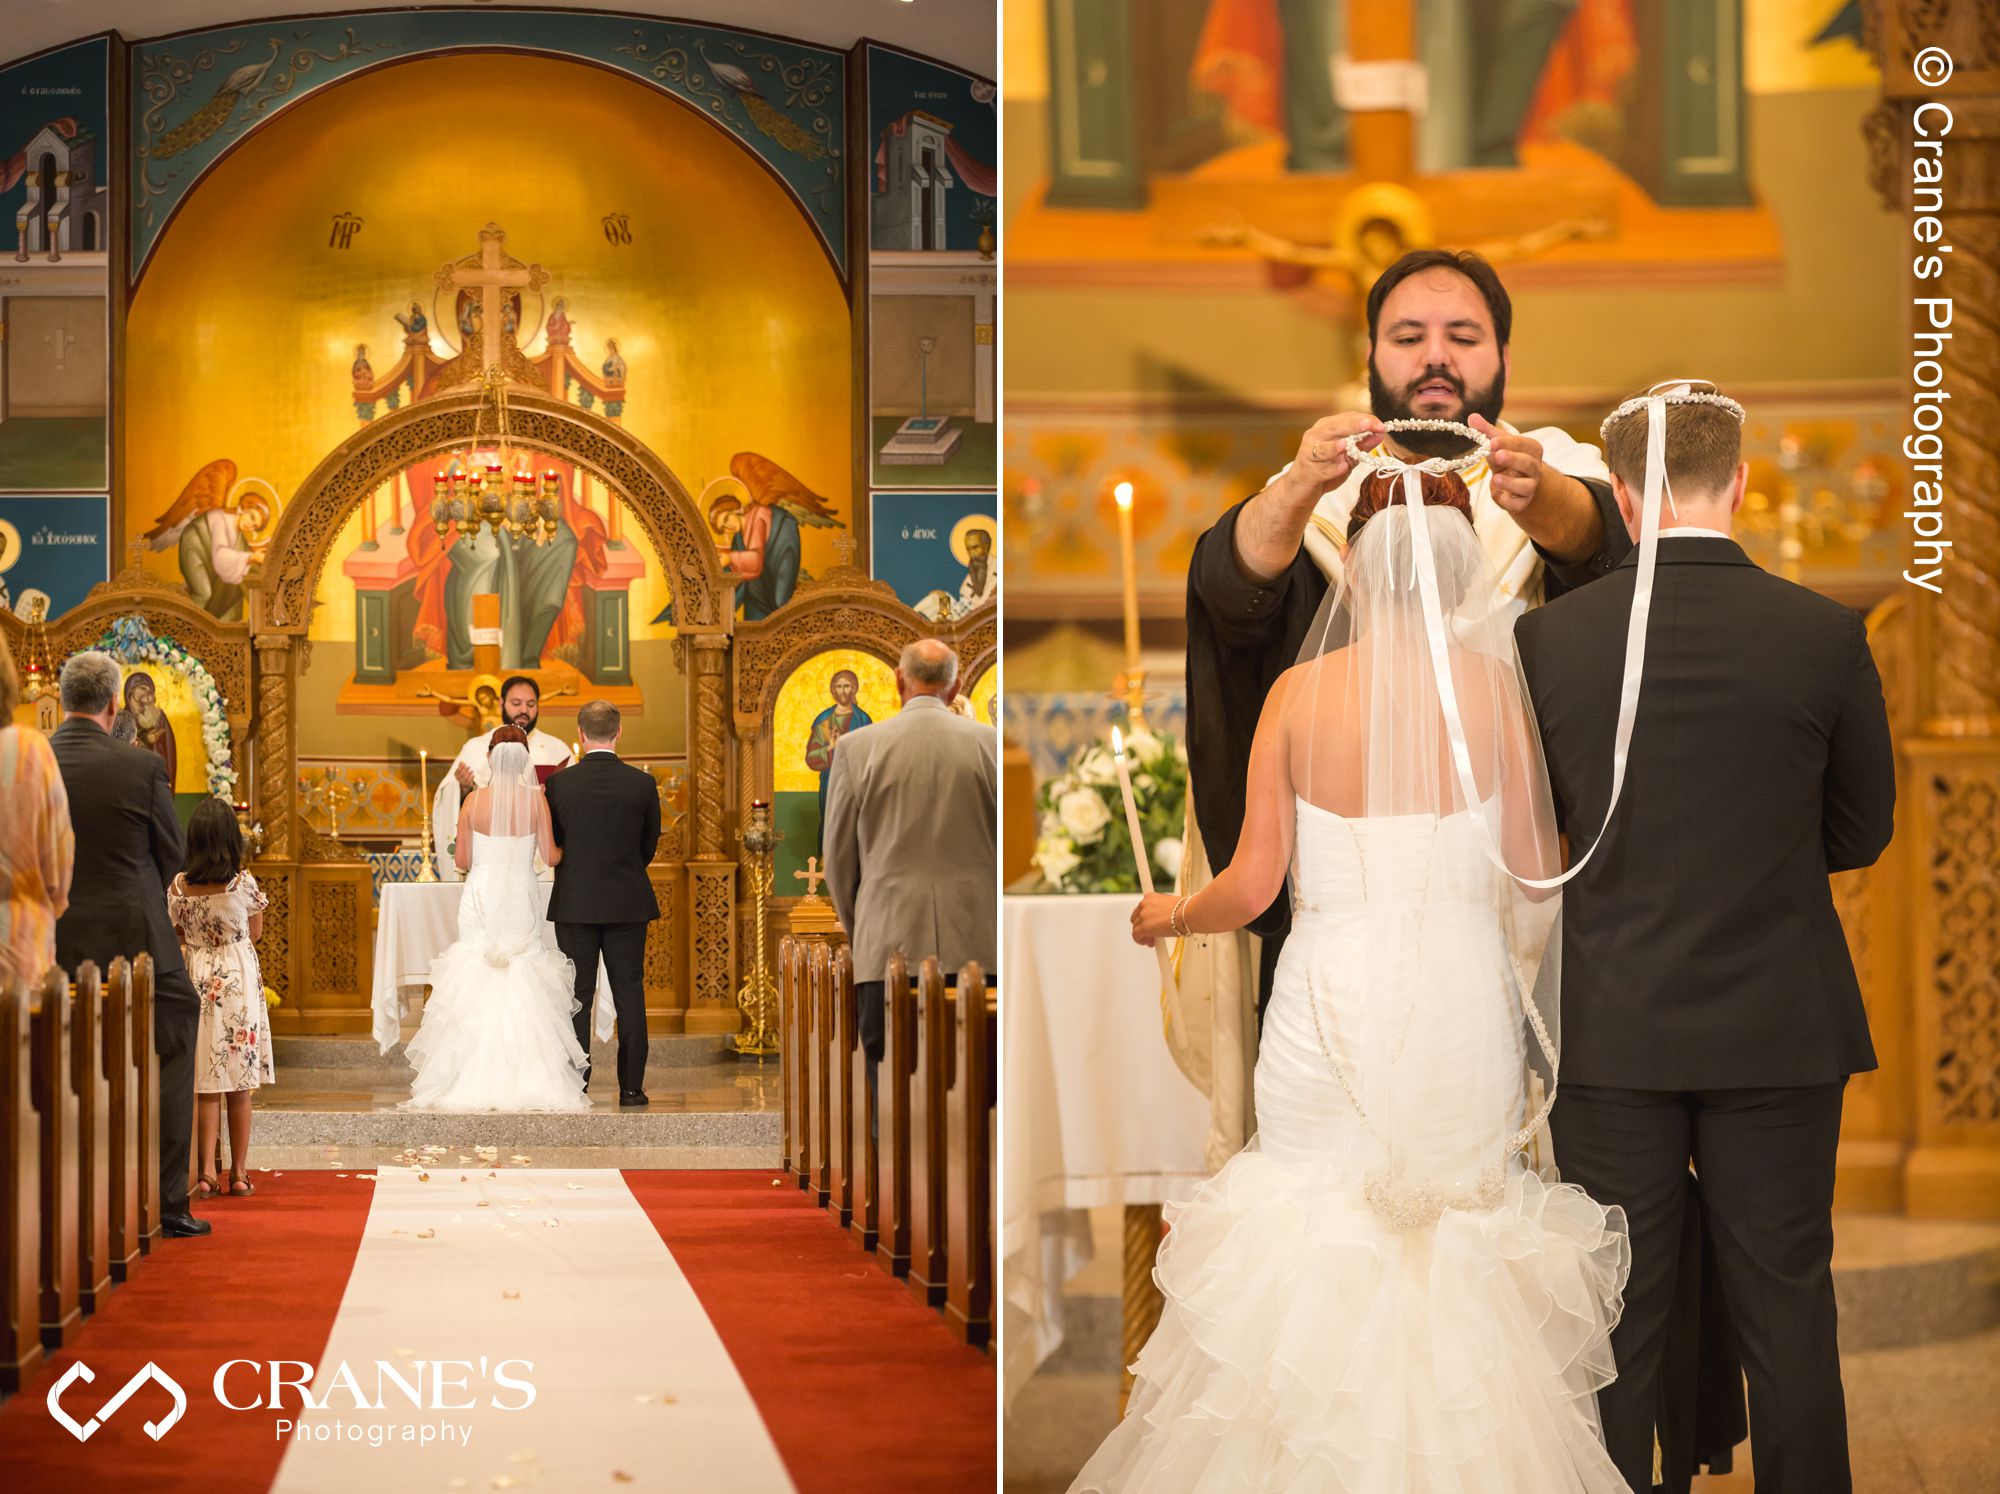 Crowning of the couple during a greek Orthodox wedding ceremony at St. Nectarios